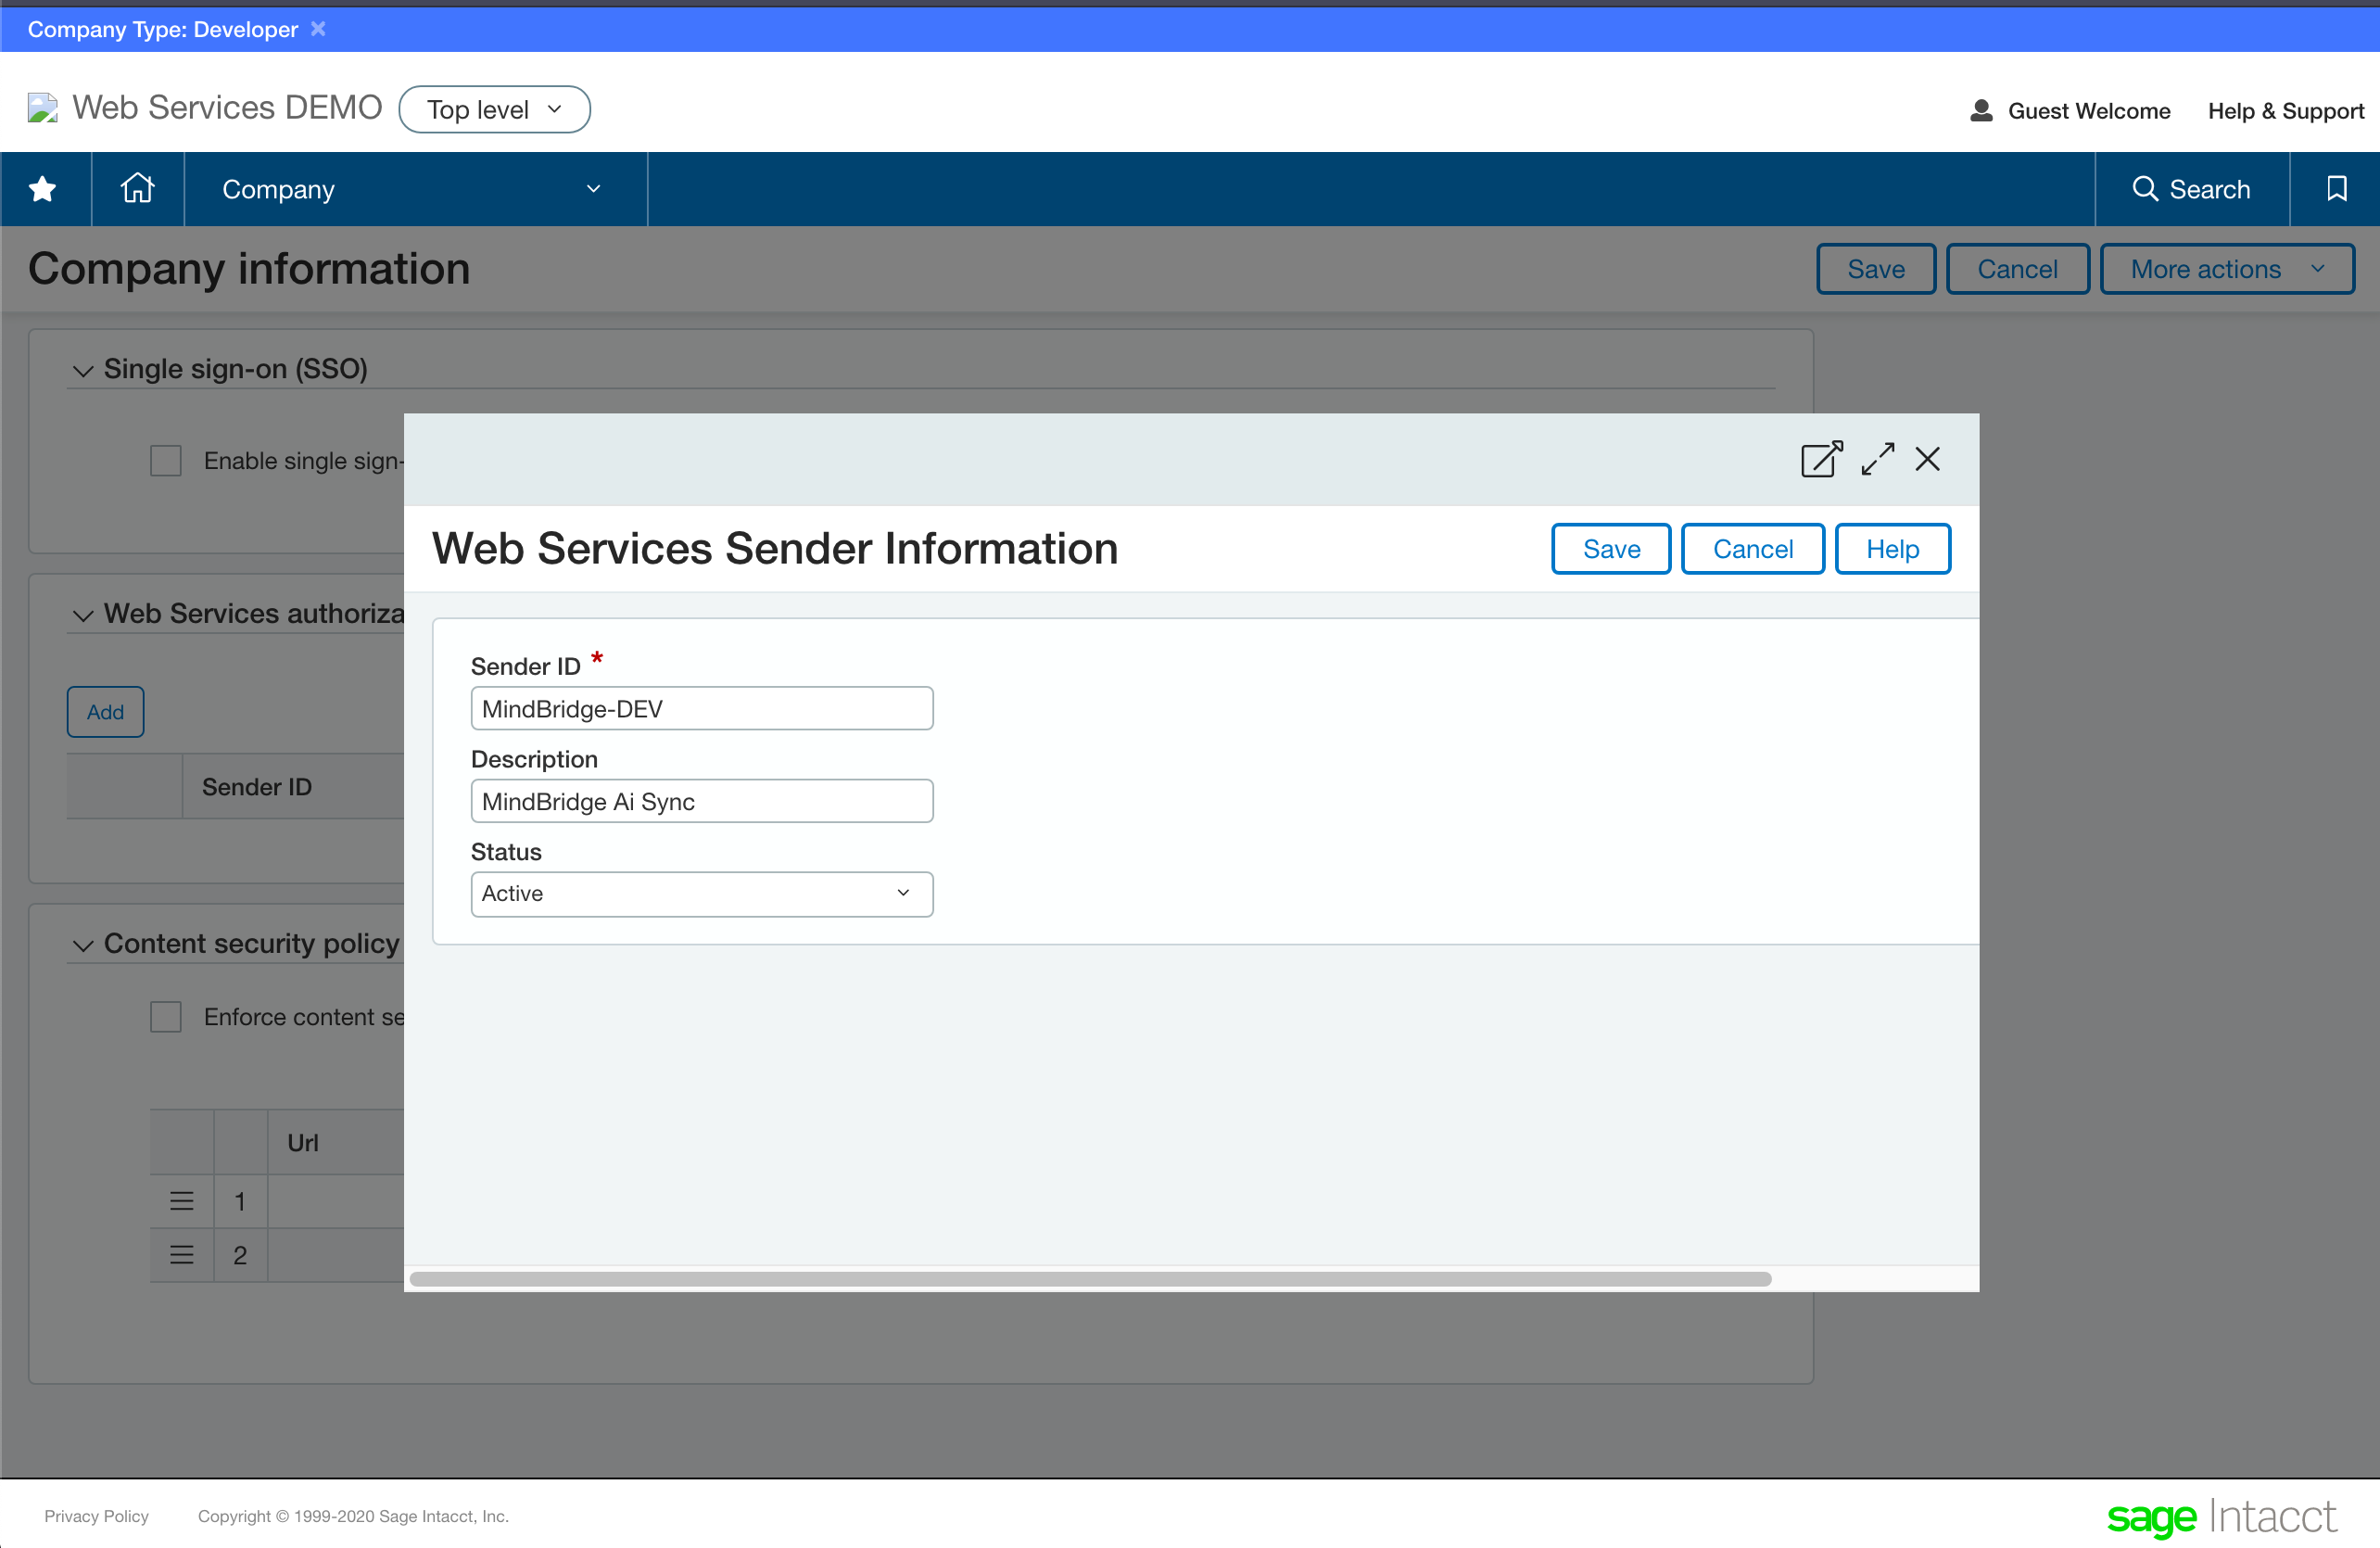 intacct web services sender information filled out